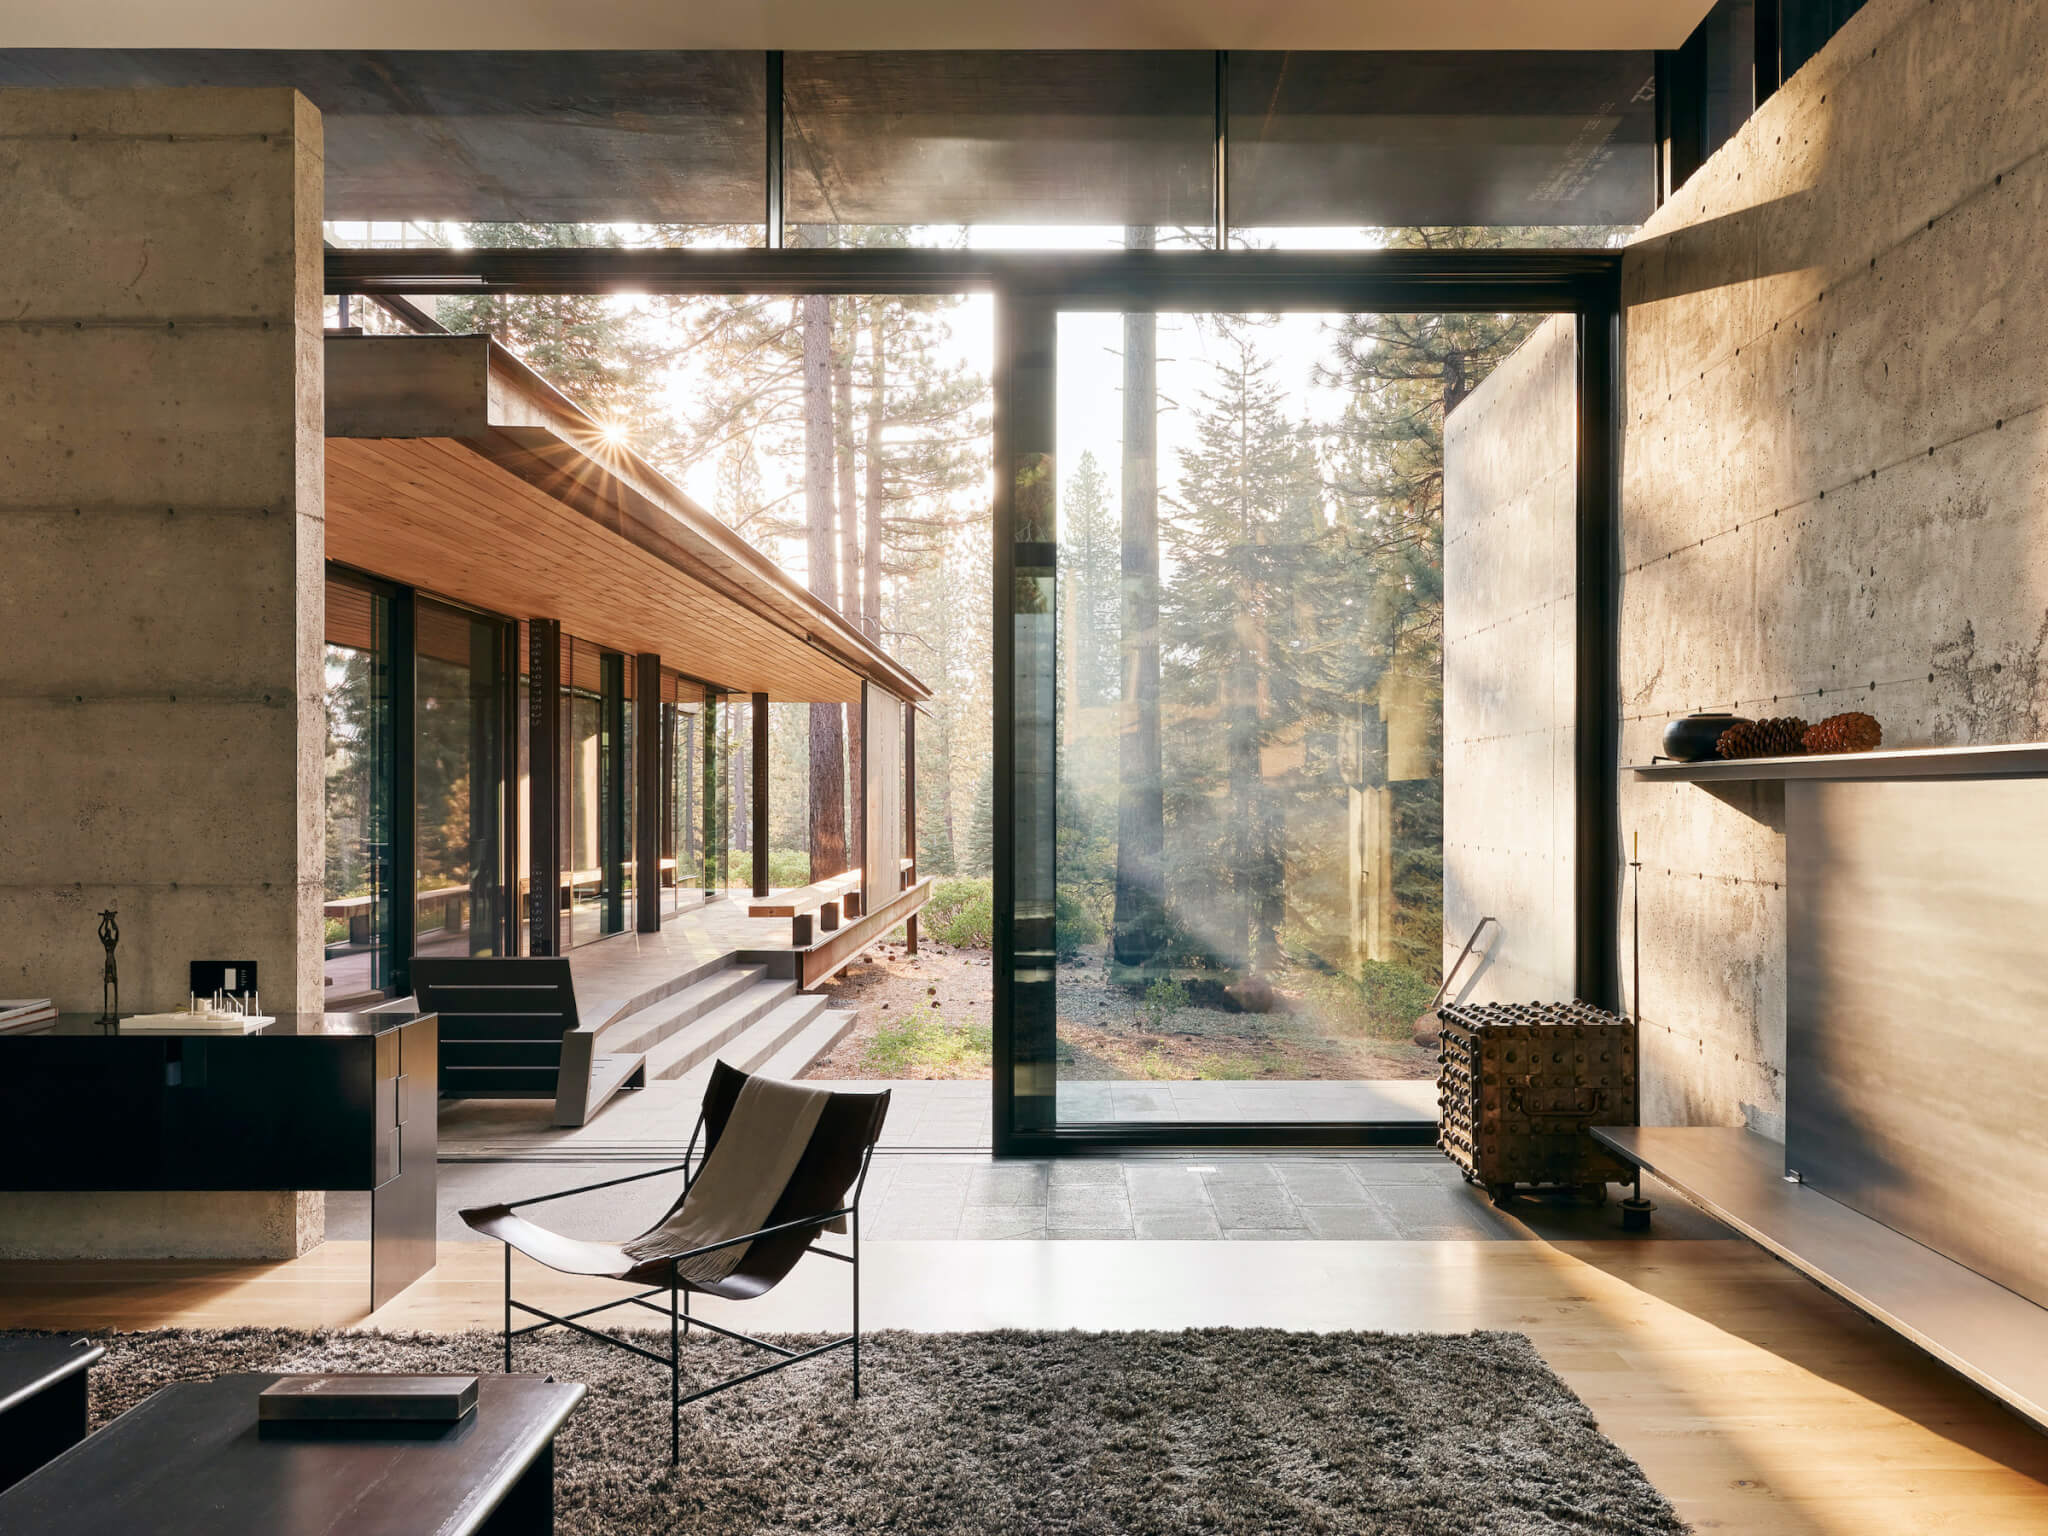 wood-clad interior of a home in the mountains